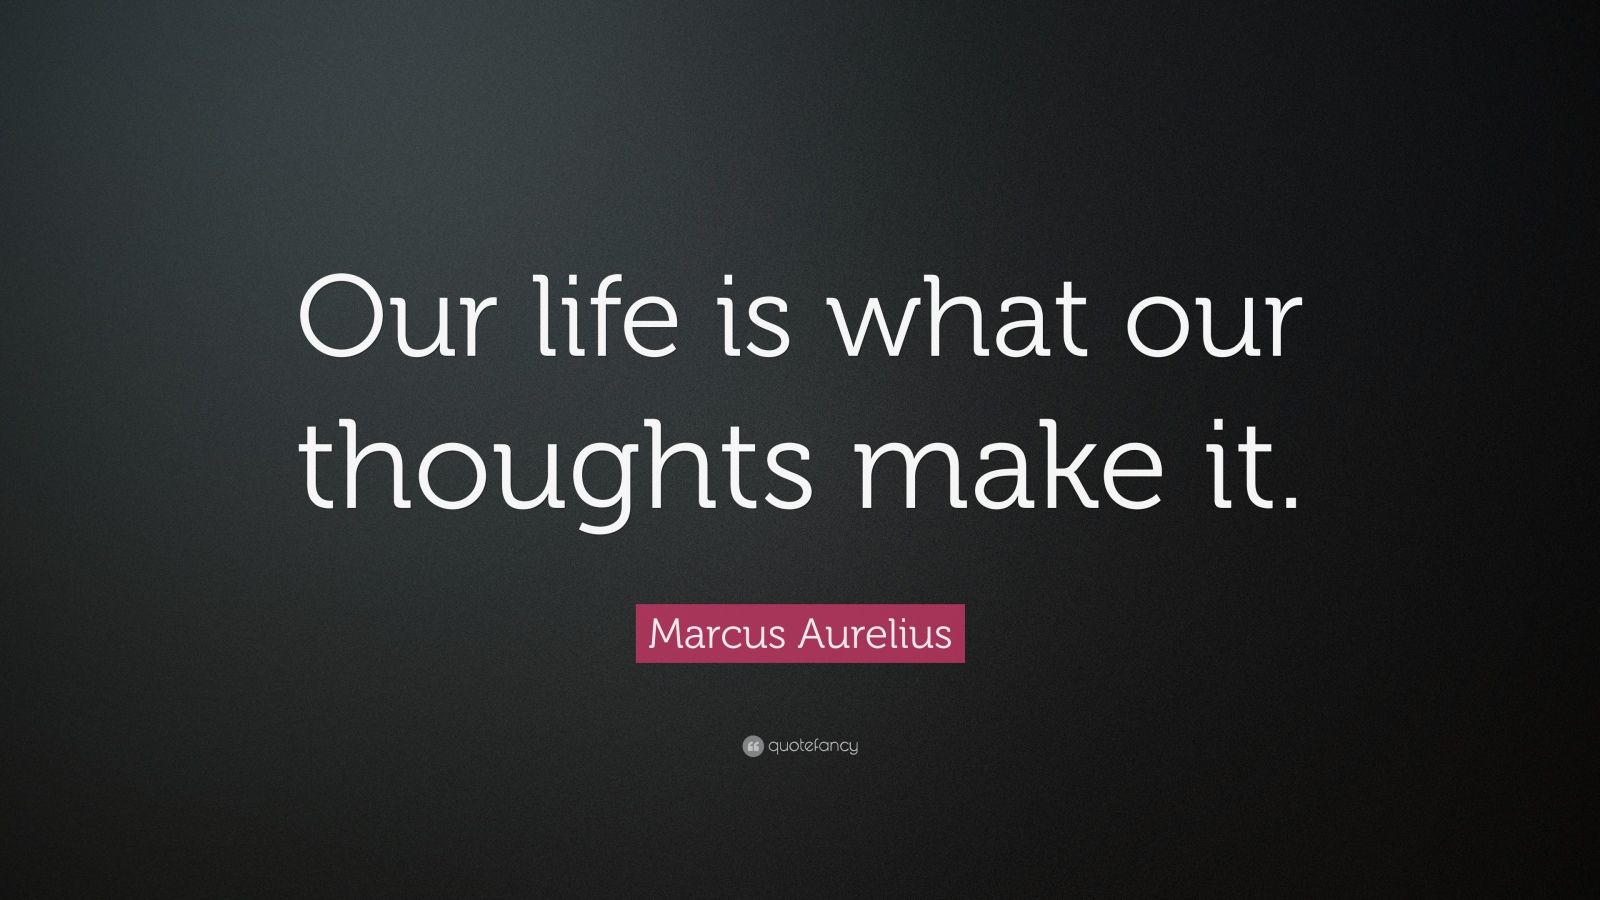 Marcus Aurelius Quote: “Our life is what our thoughts make it.” (10 ...